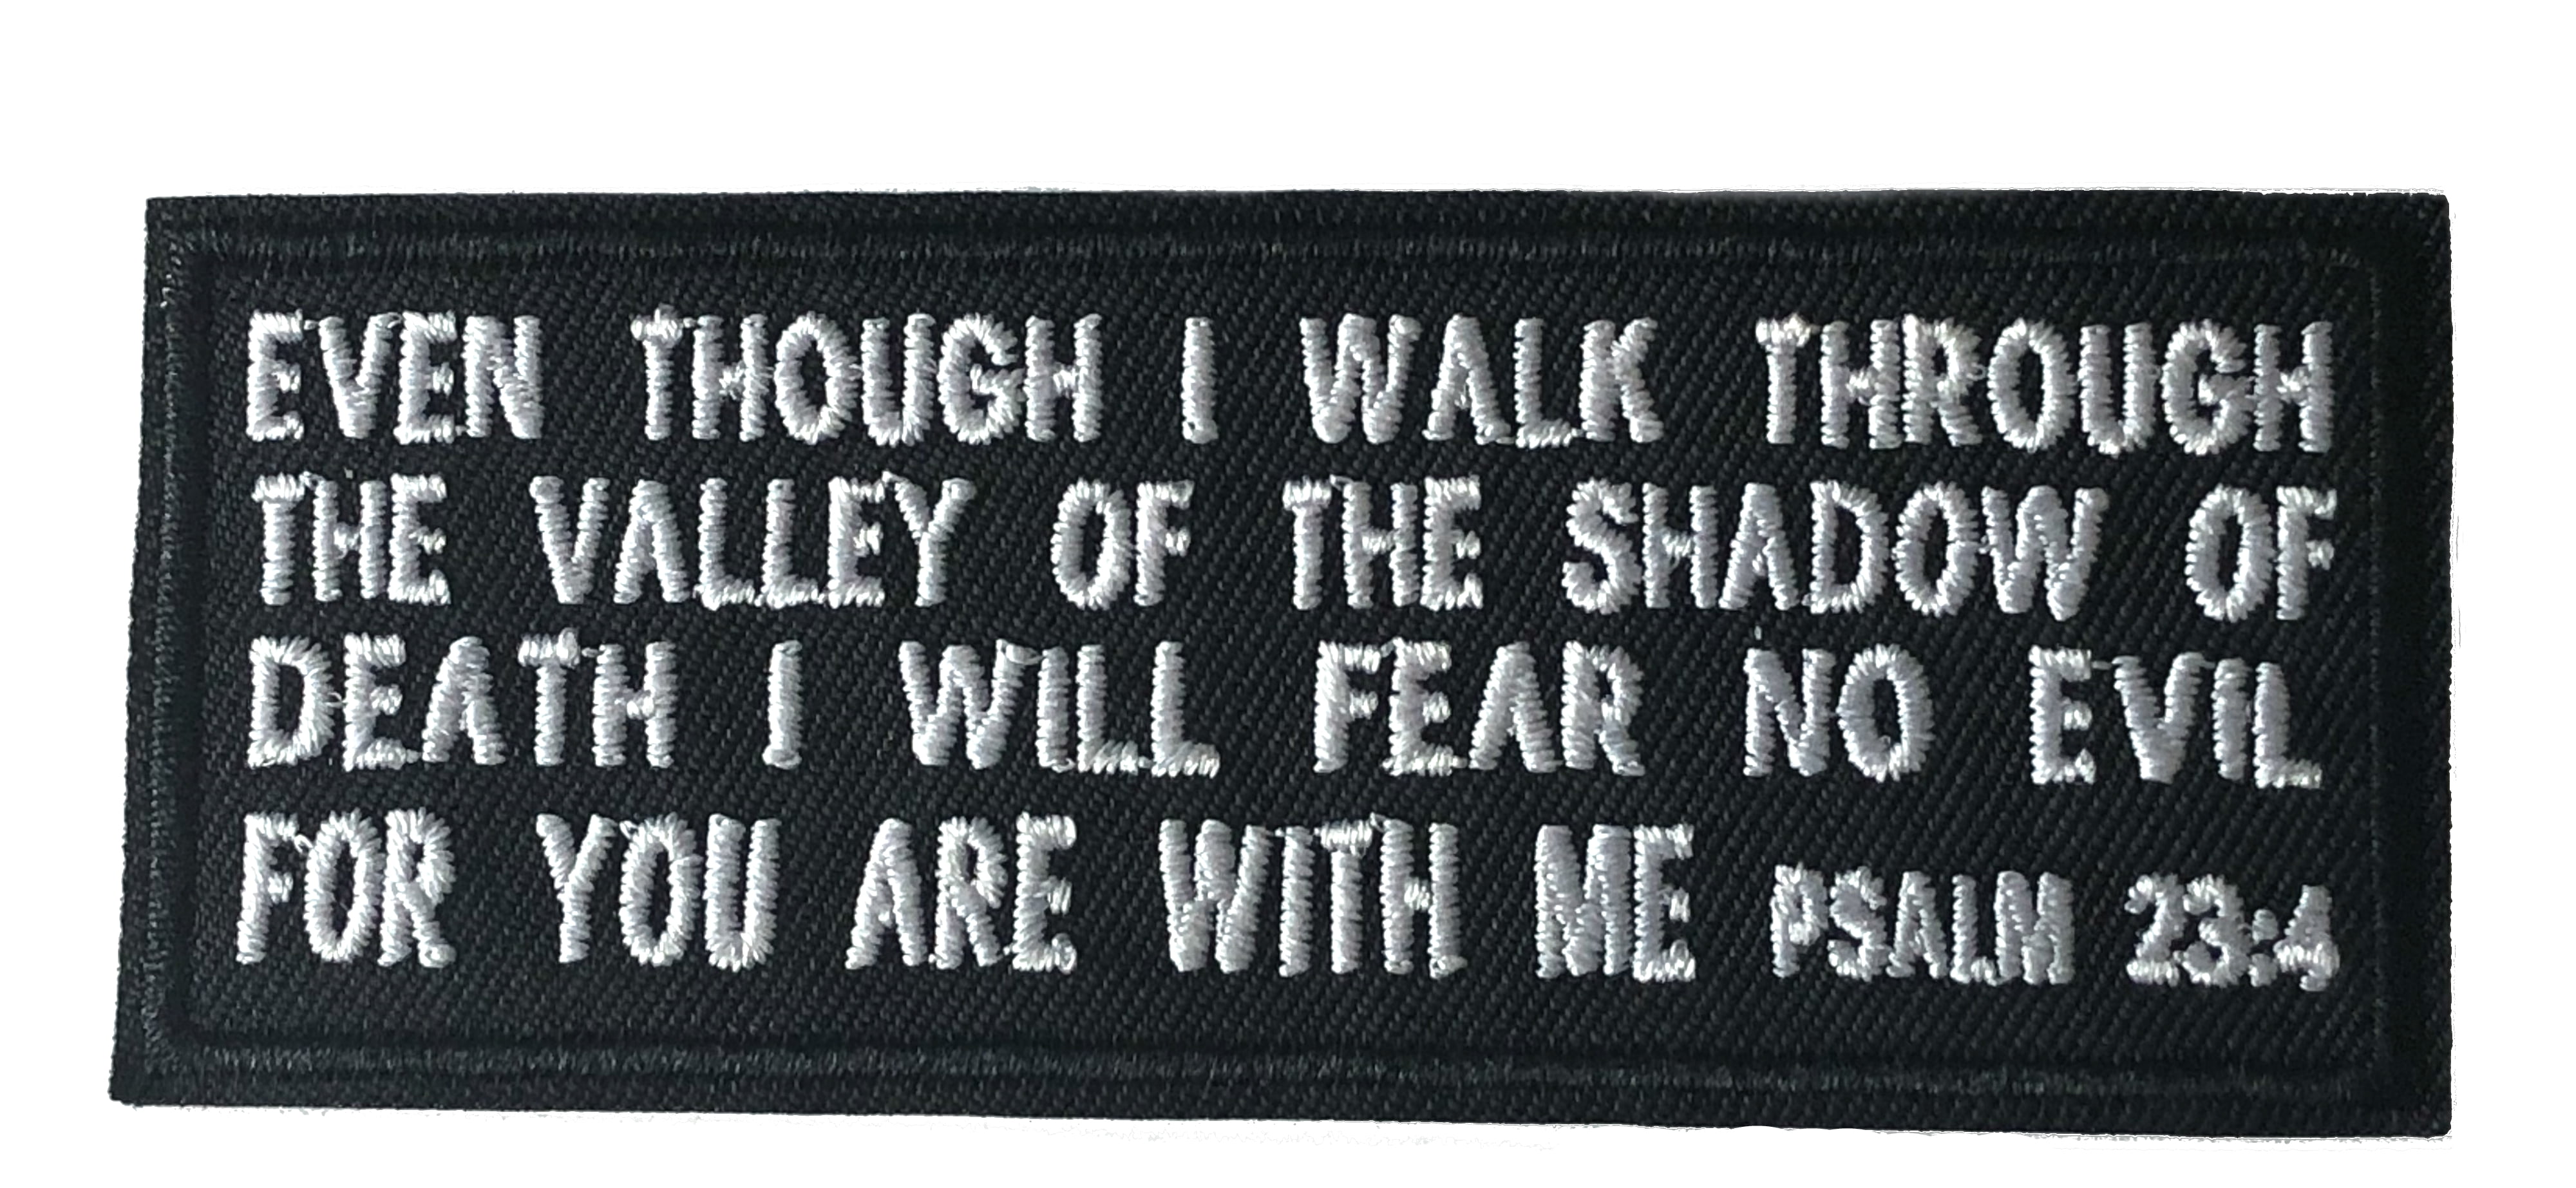 Isaiah 30:18 Embroidered Patch Iron-on/Sew-on Religious Bible Verse DIY Applique 